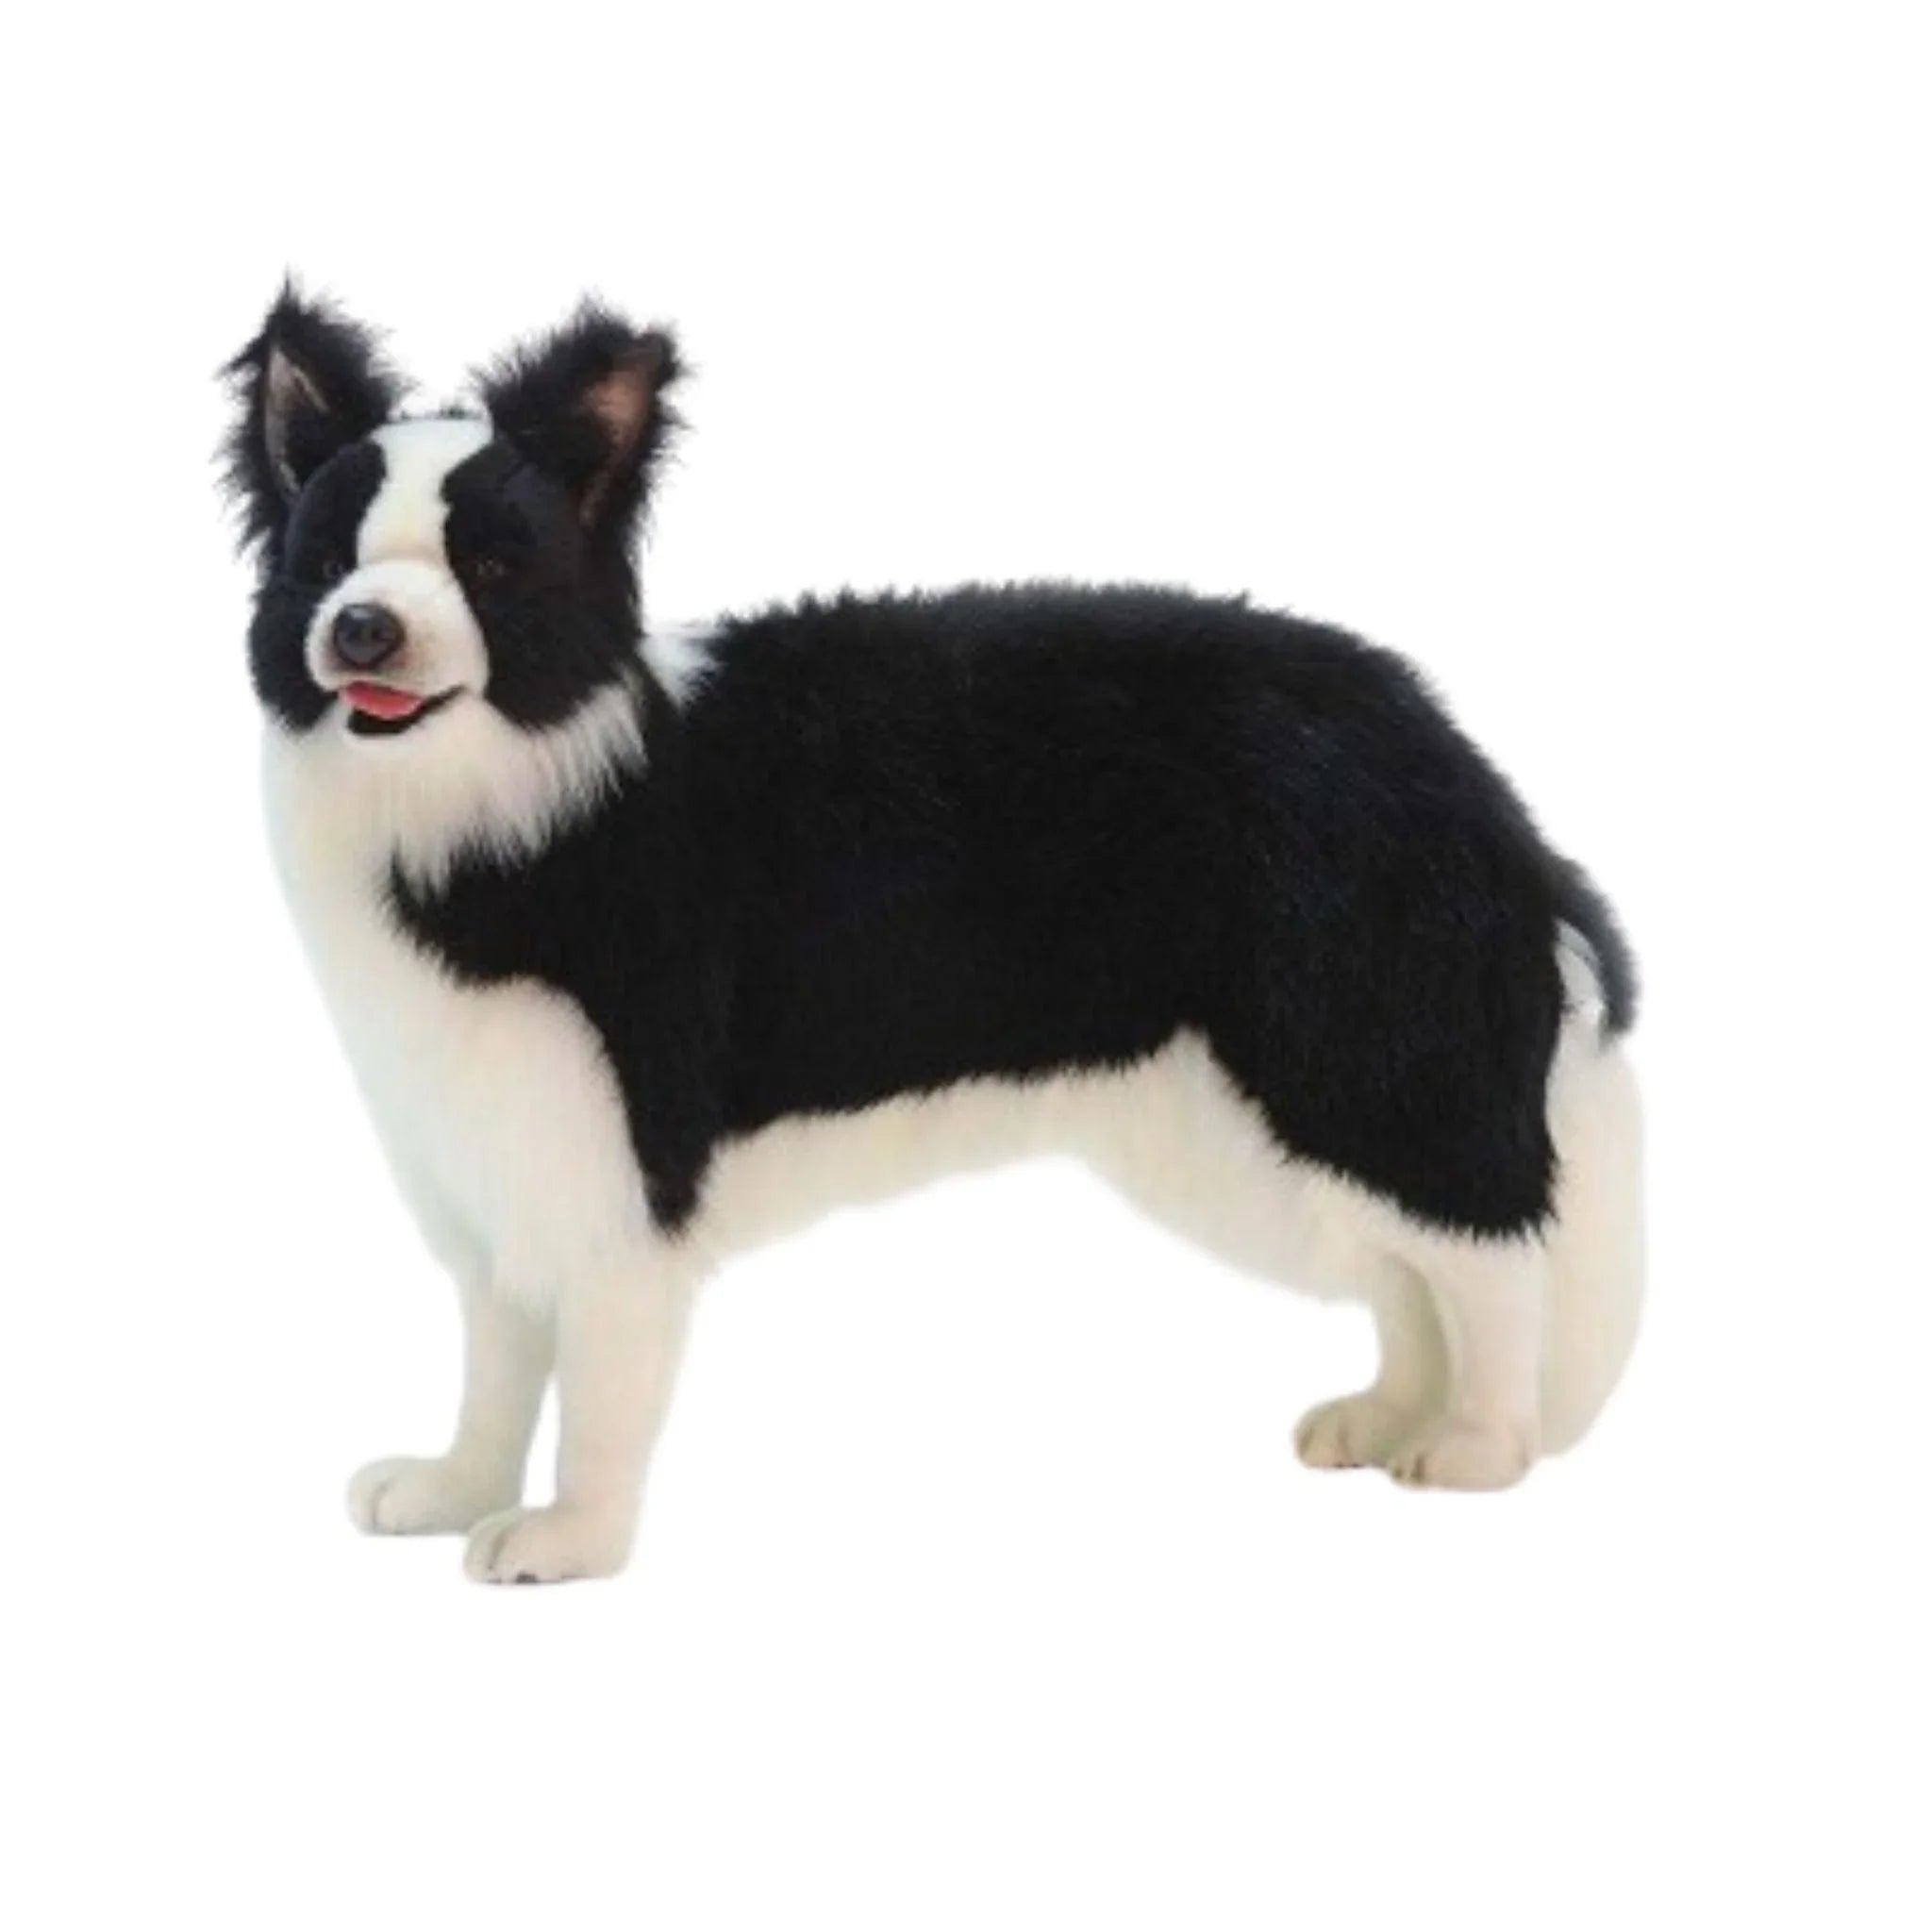 Lifesize Plush Border Collie Dog – The Well Appointed House